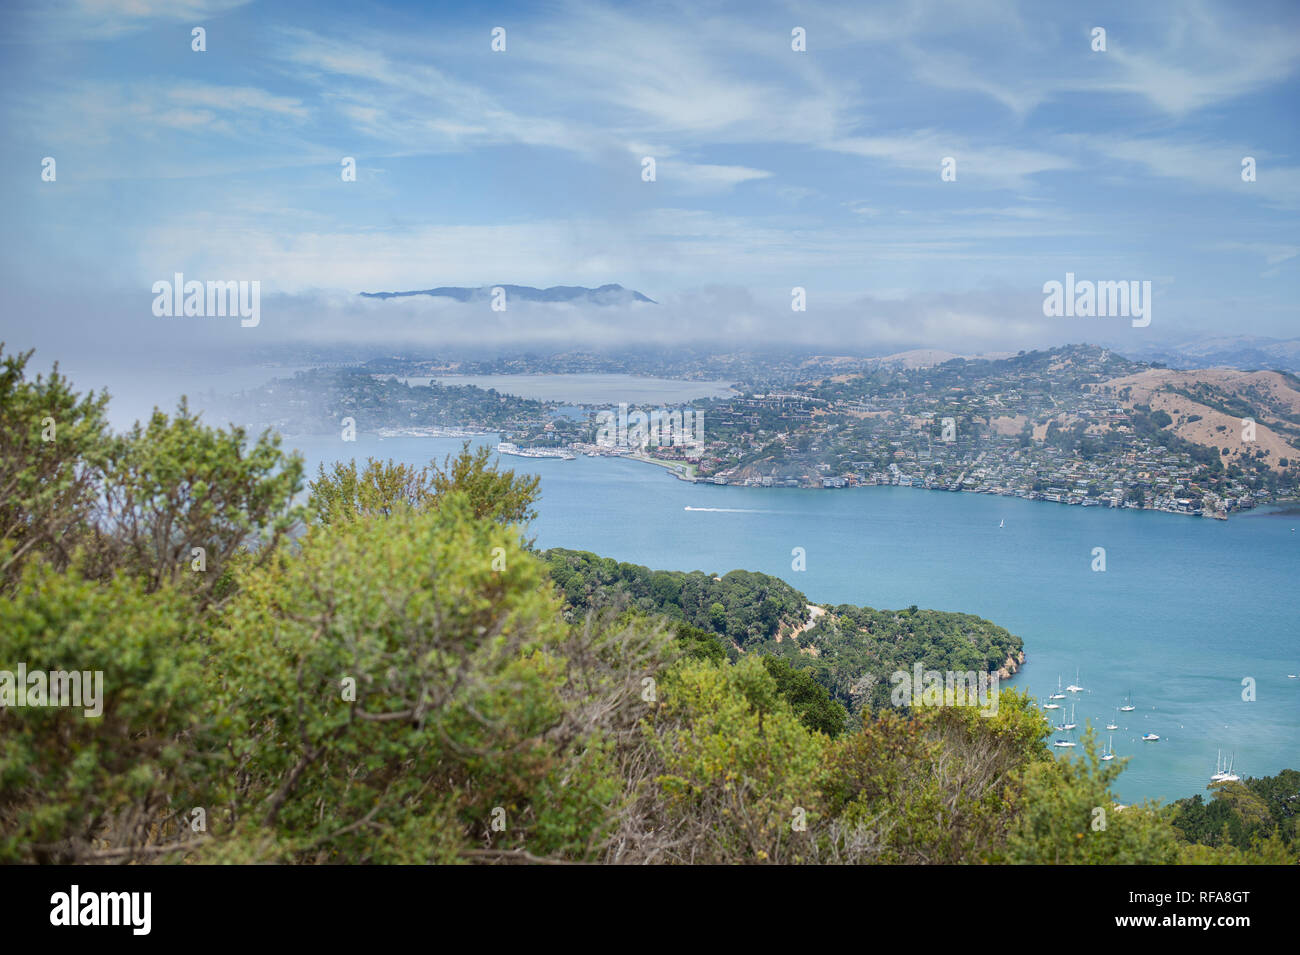 Angel Island State Park is an island in San Francisco Bay where hikers can get amazing views of the city. Stock Photo